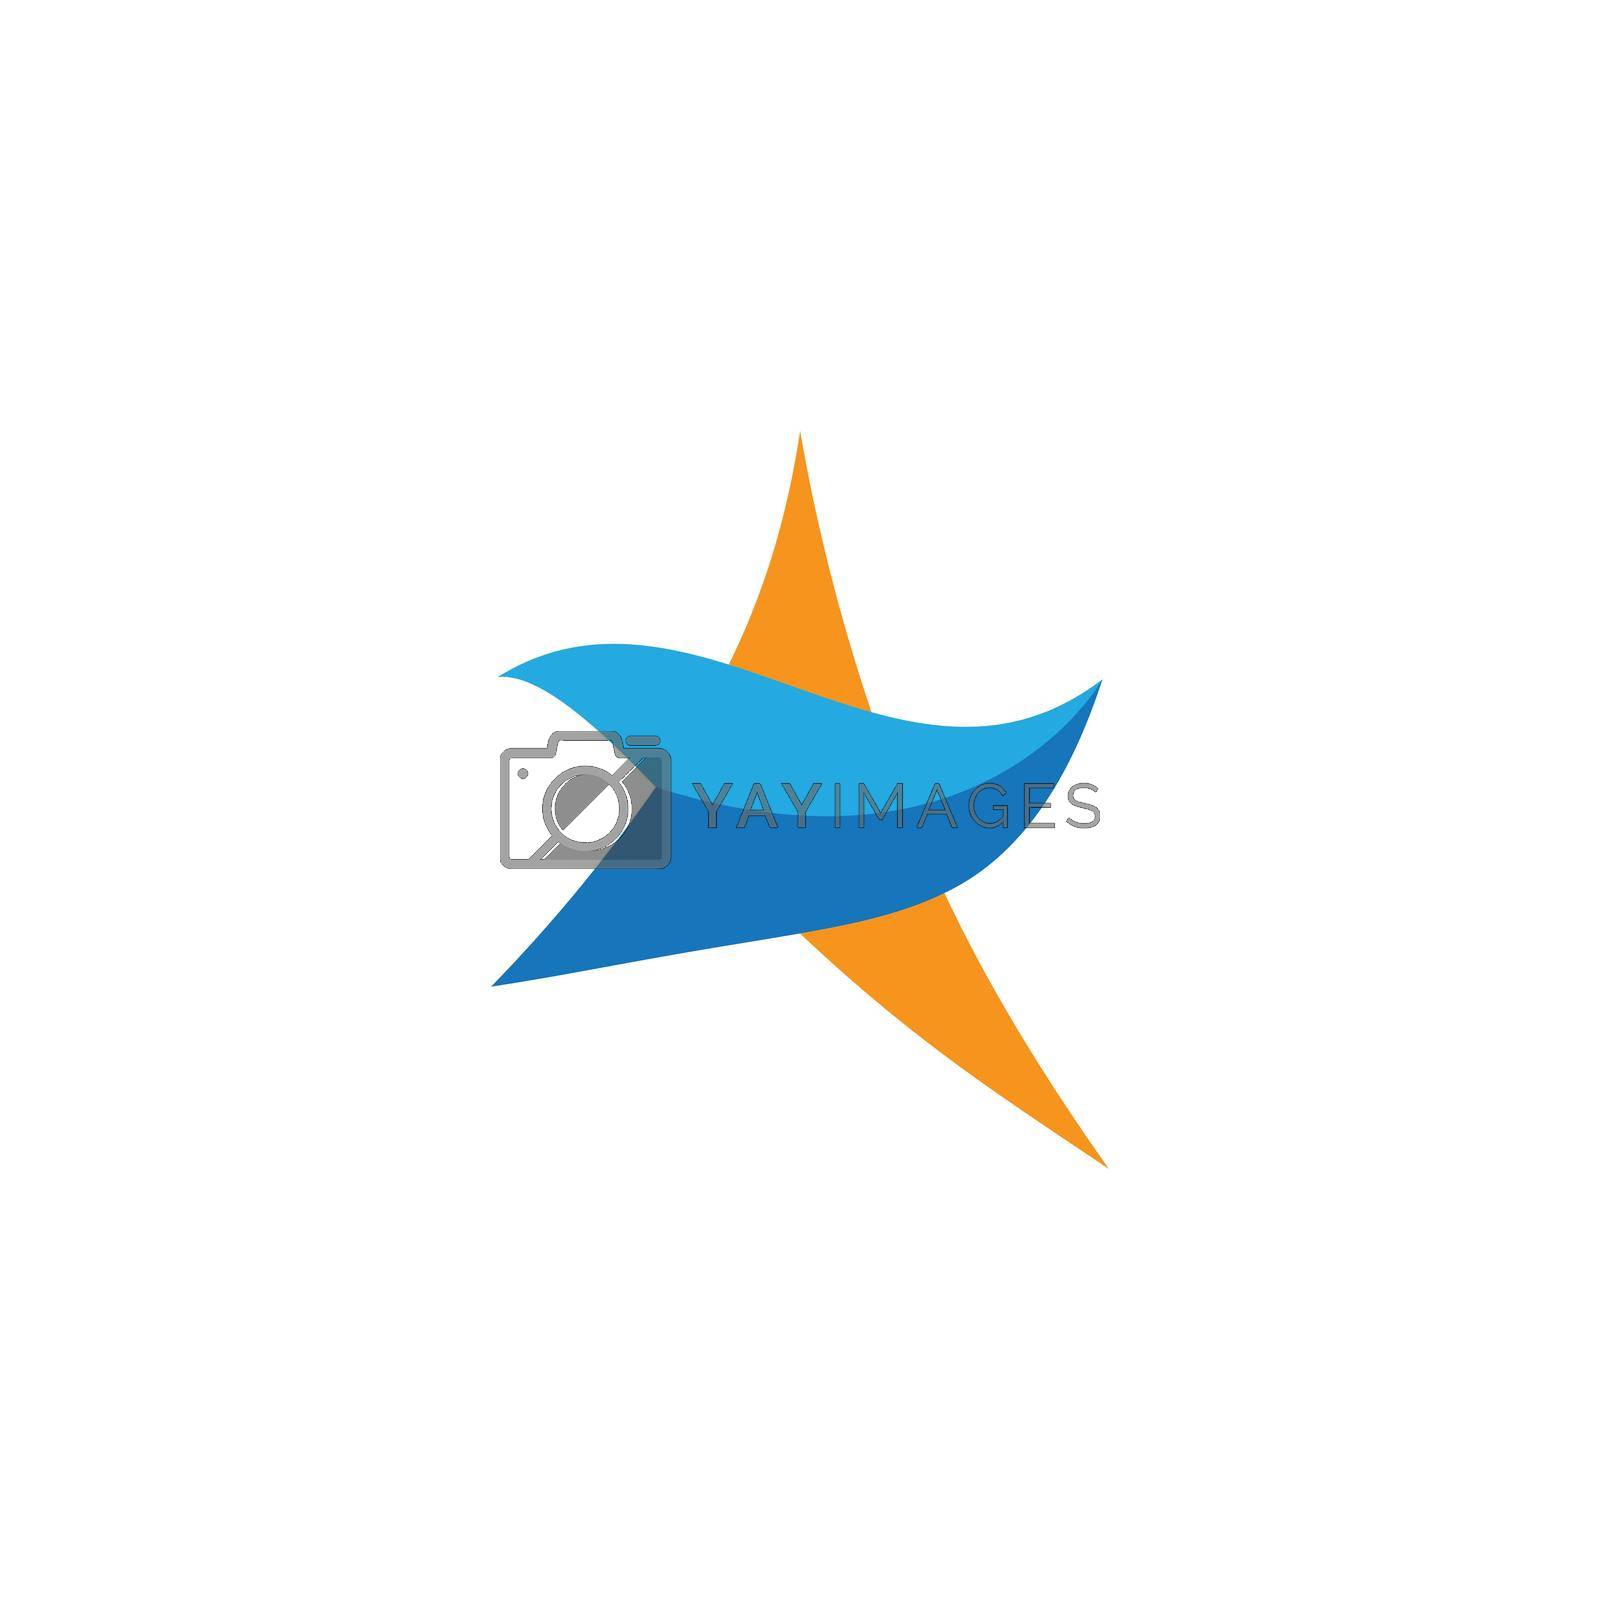 Royalty free image of star logo vector by awk